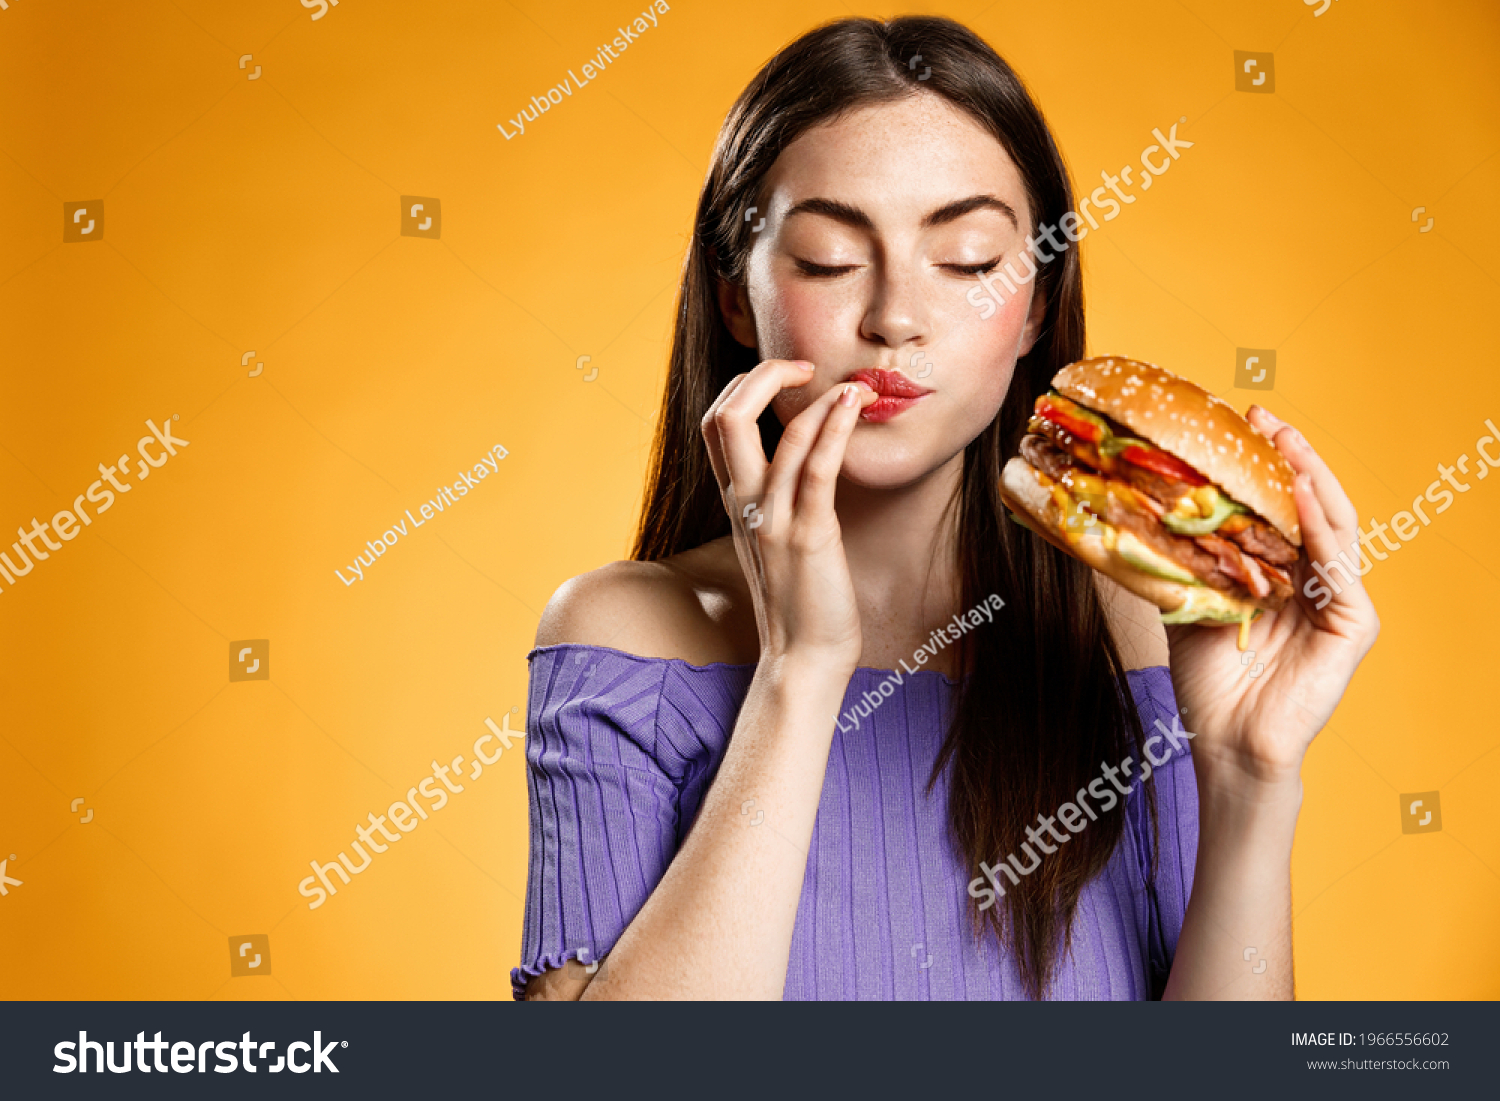 Woman eating cheeseburger with satisfaction. Girl enjoys tasty hamburger takeaway, licking fingers delicious bite of burger, order fastfood delivery while hungry, standing over orange background #1966556602